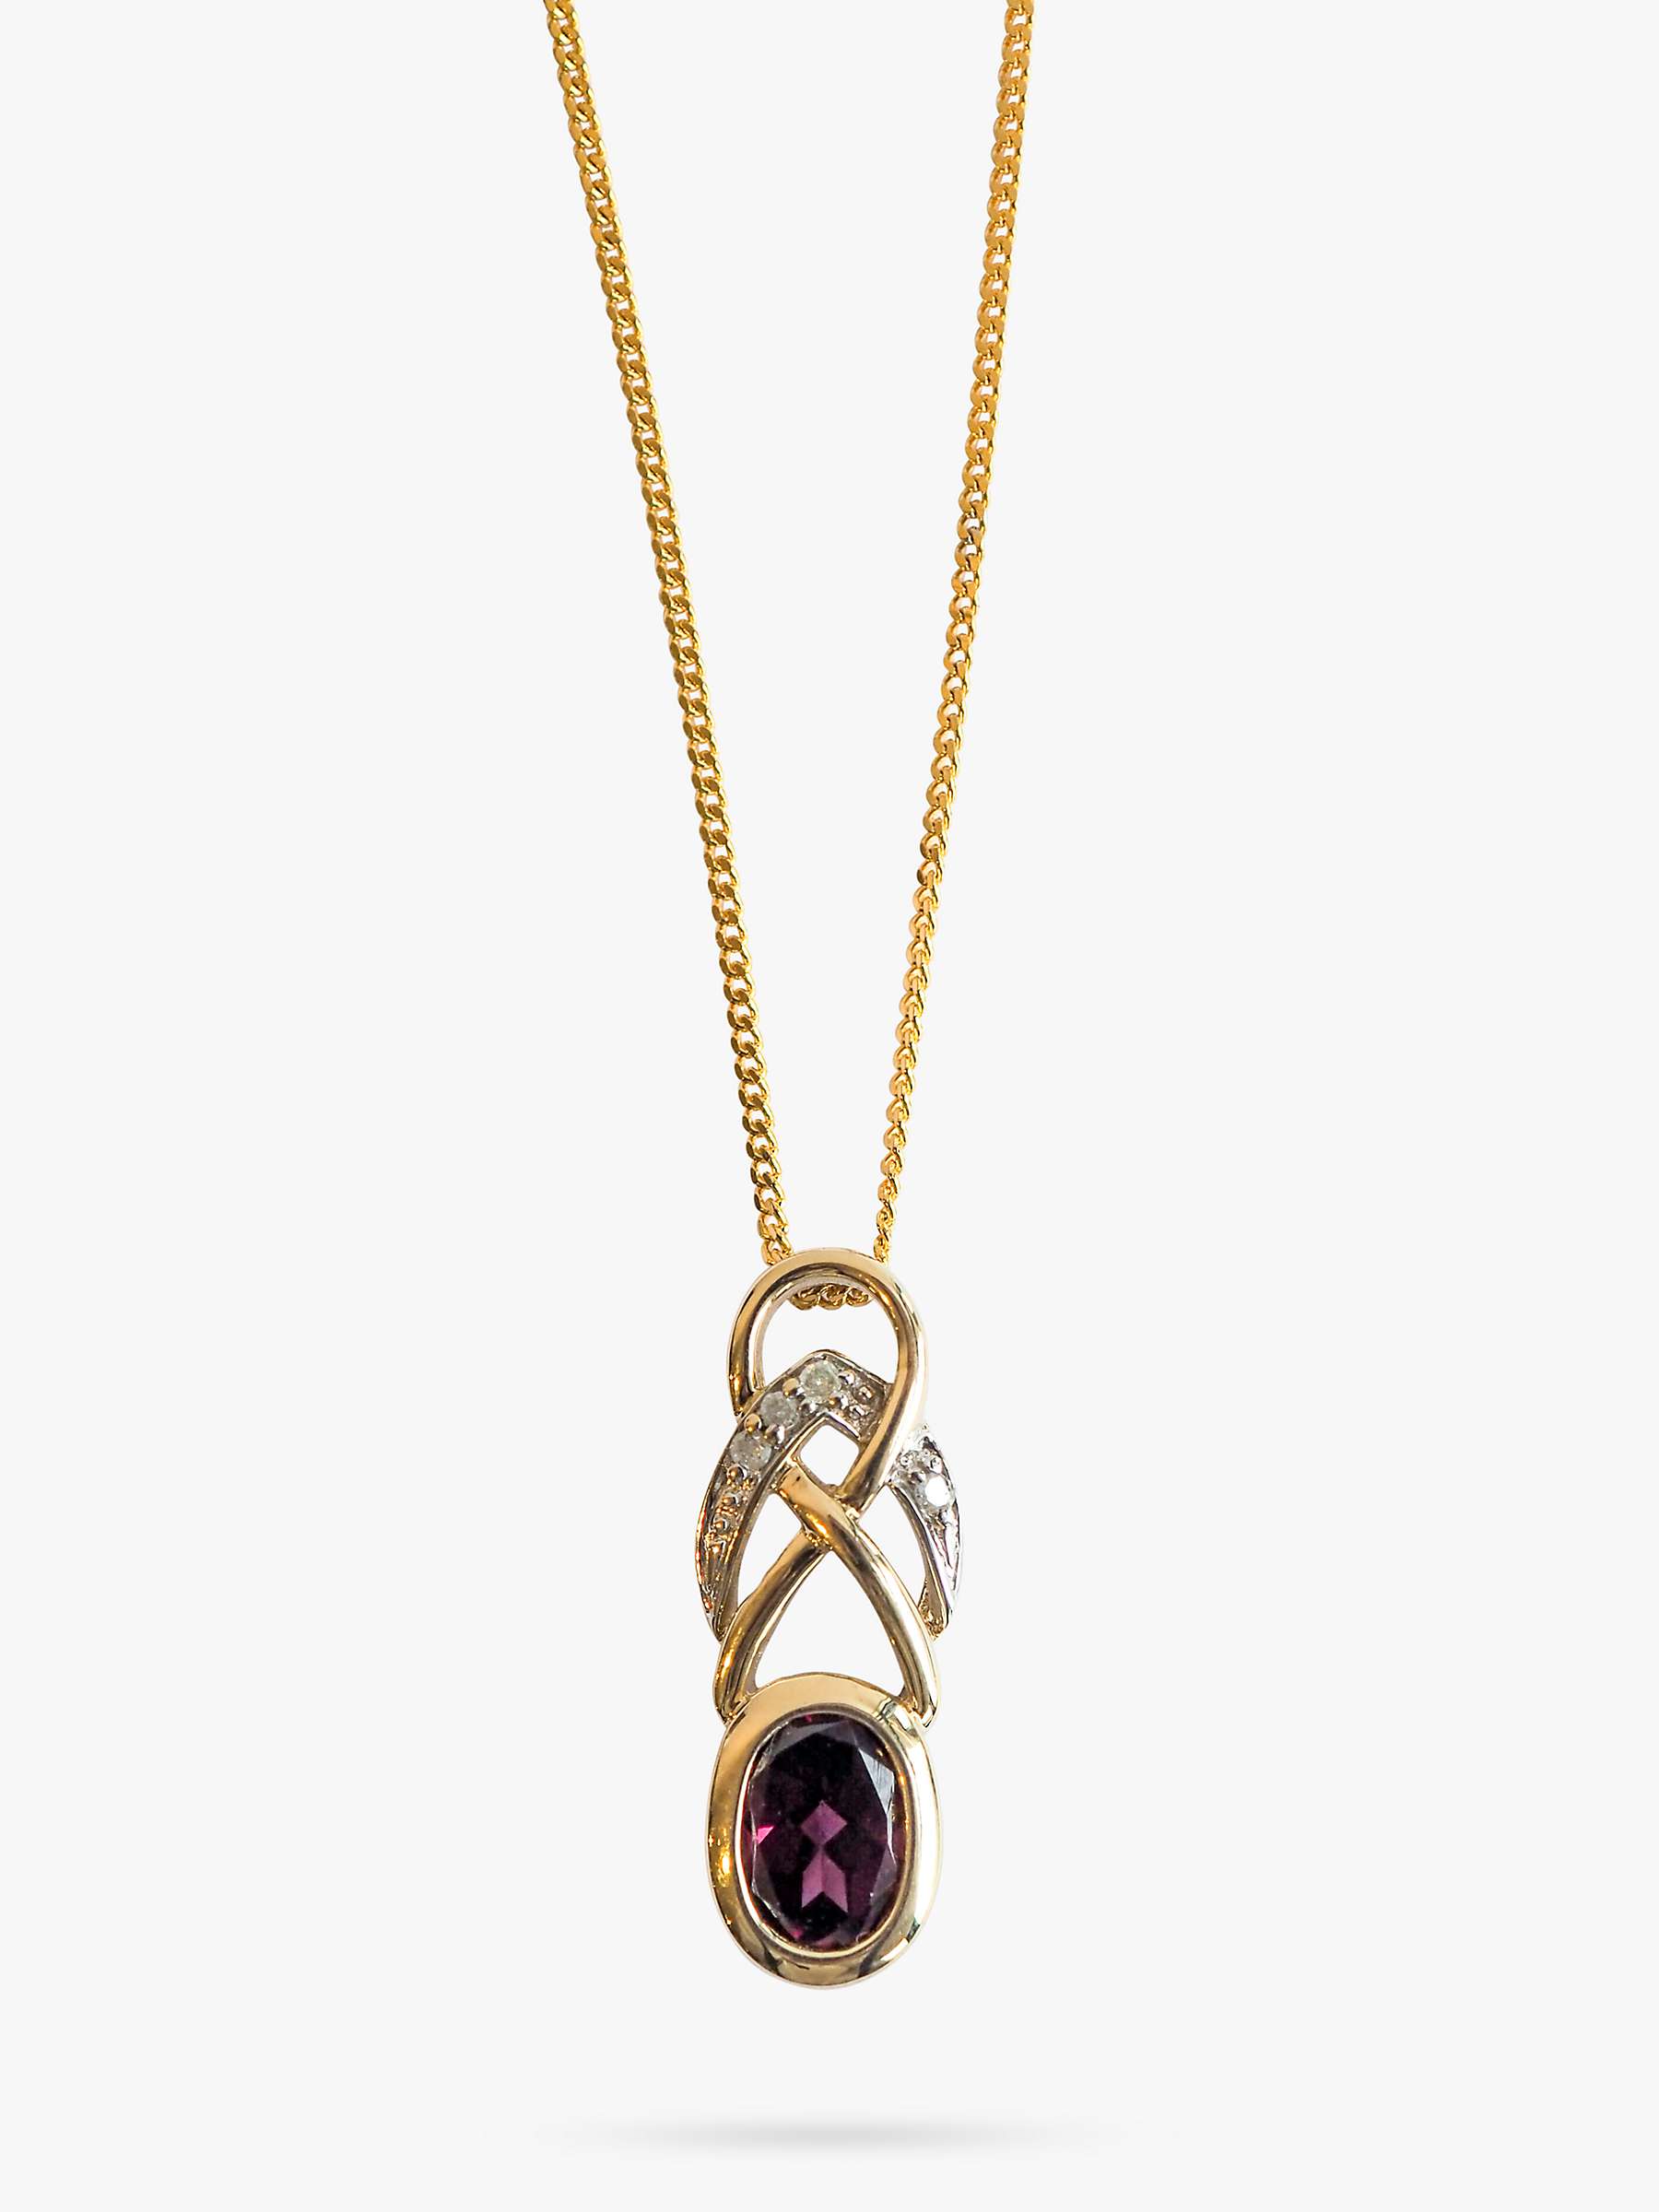 Buy L & T Heirlooms Second Hand 9ct Yellow Gold Diamond & Rhodalite Pendant Necklace Online at johnlewis.com